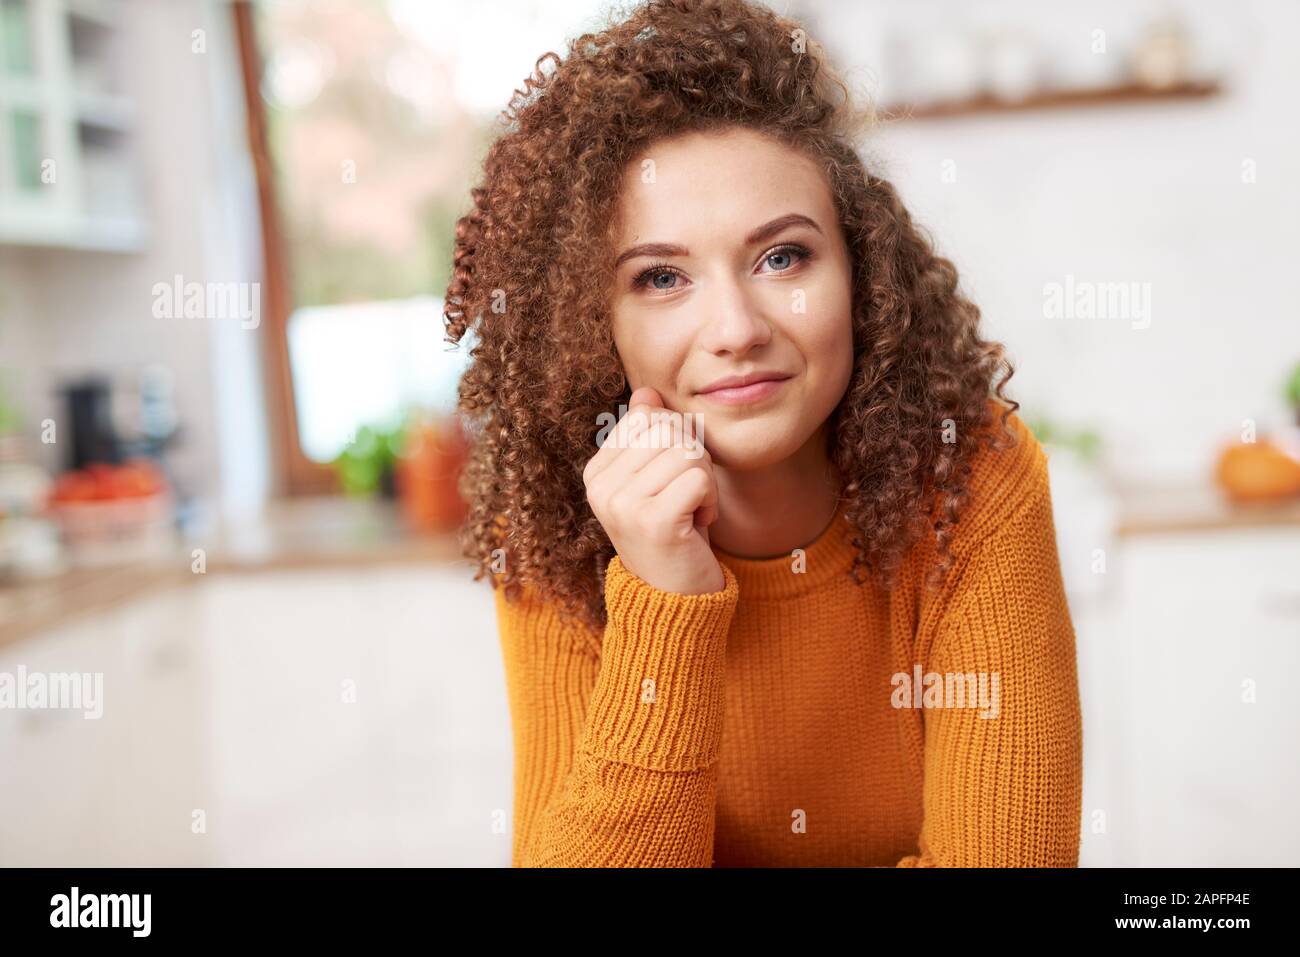 Portrait of smiling young woman Stock Photo